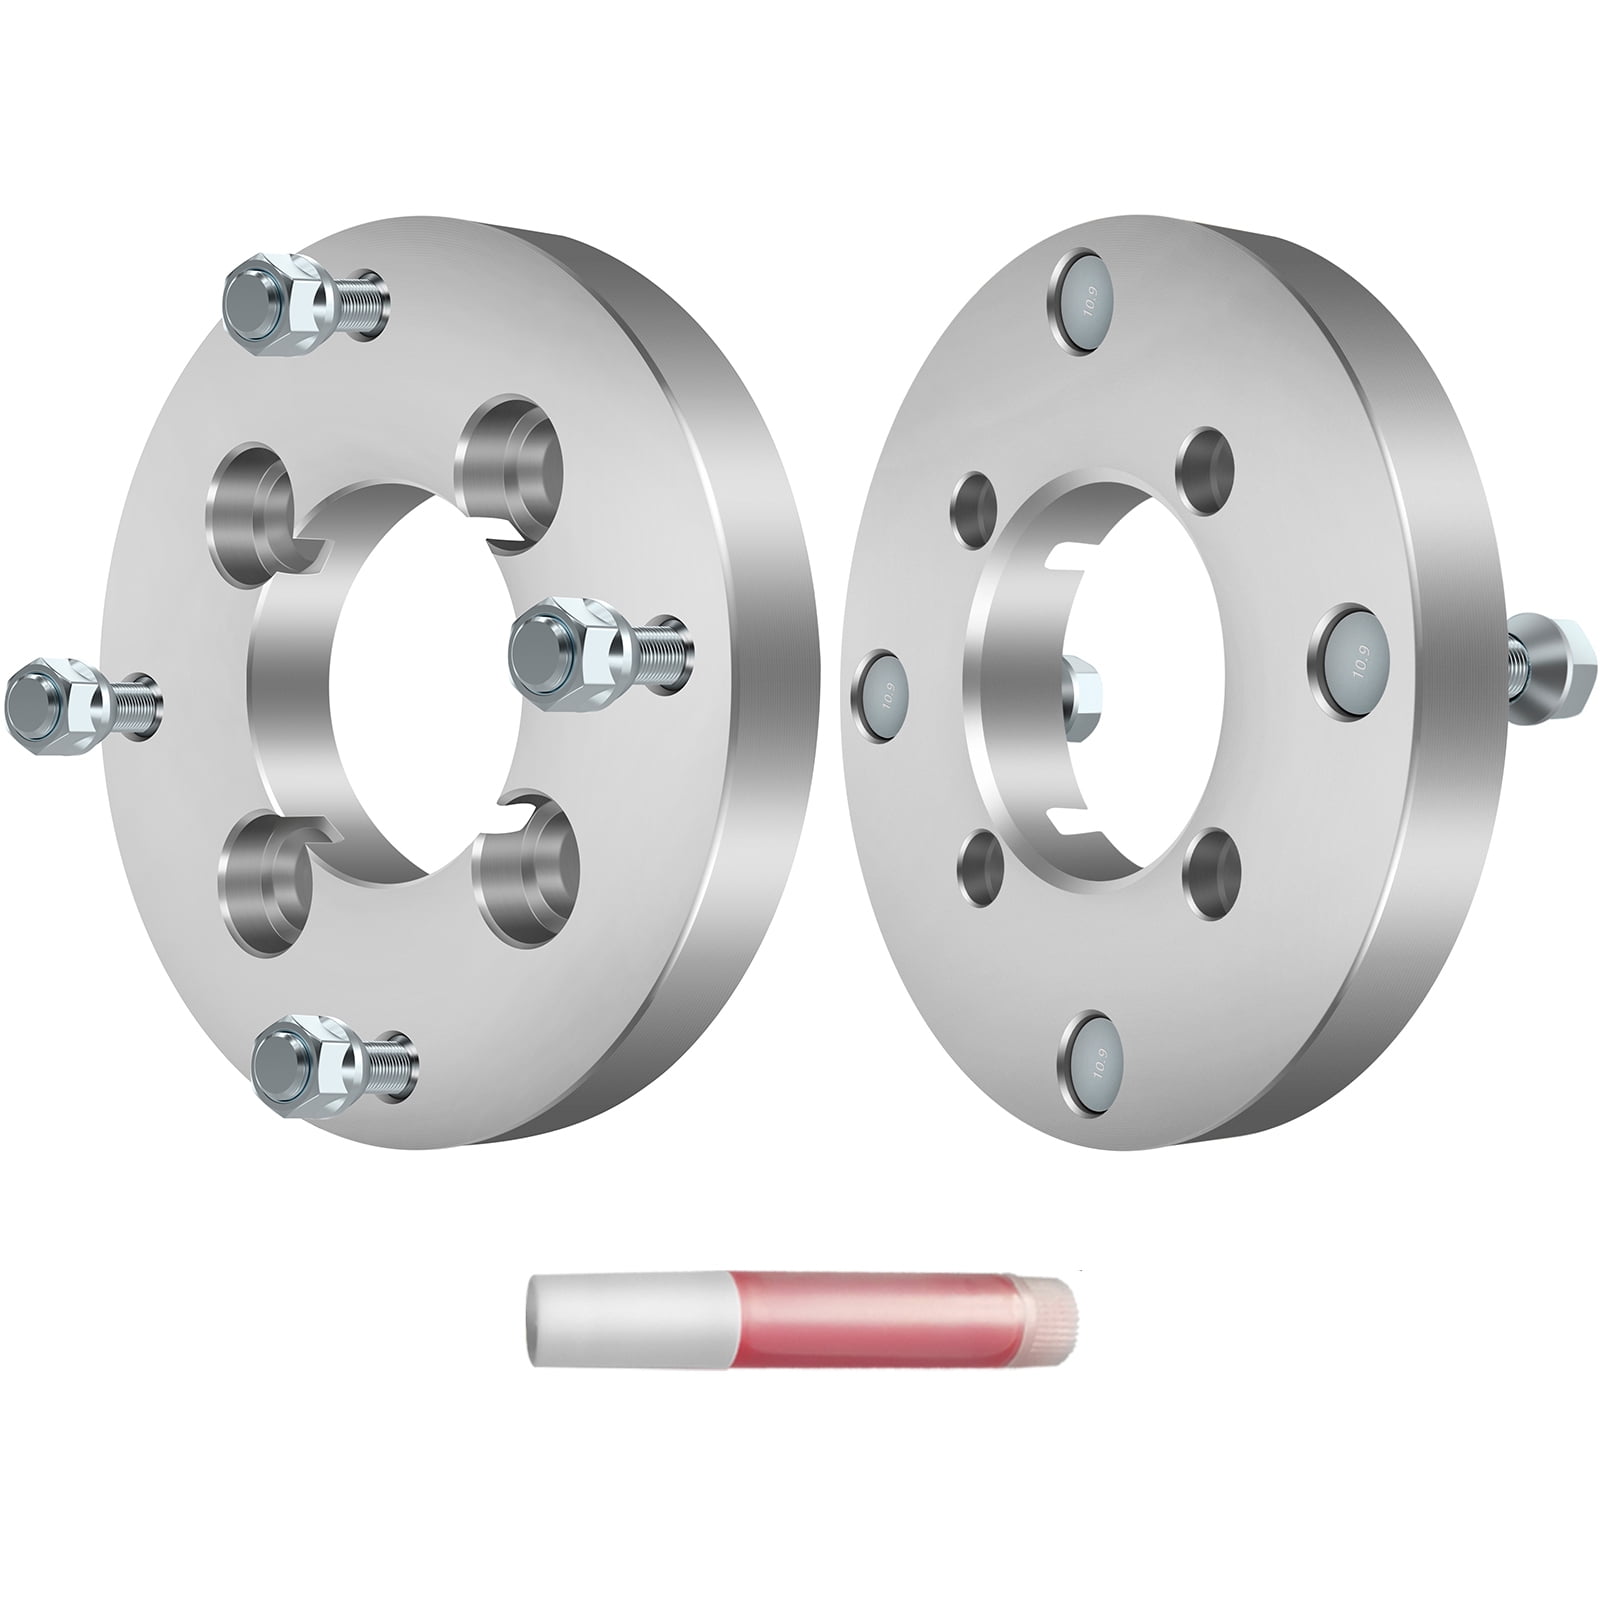 SCITOO 2X 4 Lug Wheel Spacers Adapters 4x110 to 4x156 12x1.25 74 1 Compatible with 1998-2015 Arctic Cat 400 2002-2004 for Bombardier Quest 500 1999-2005 for Bombardier Traxter 500 